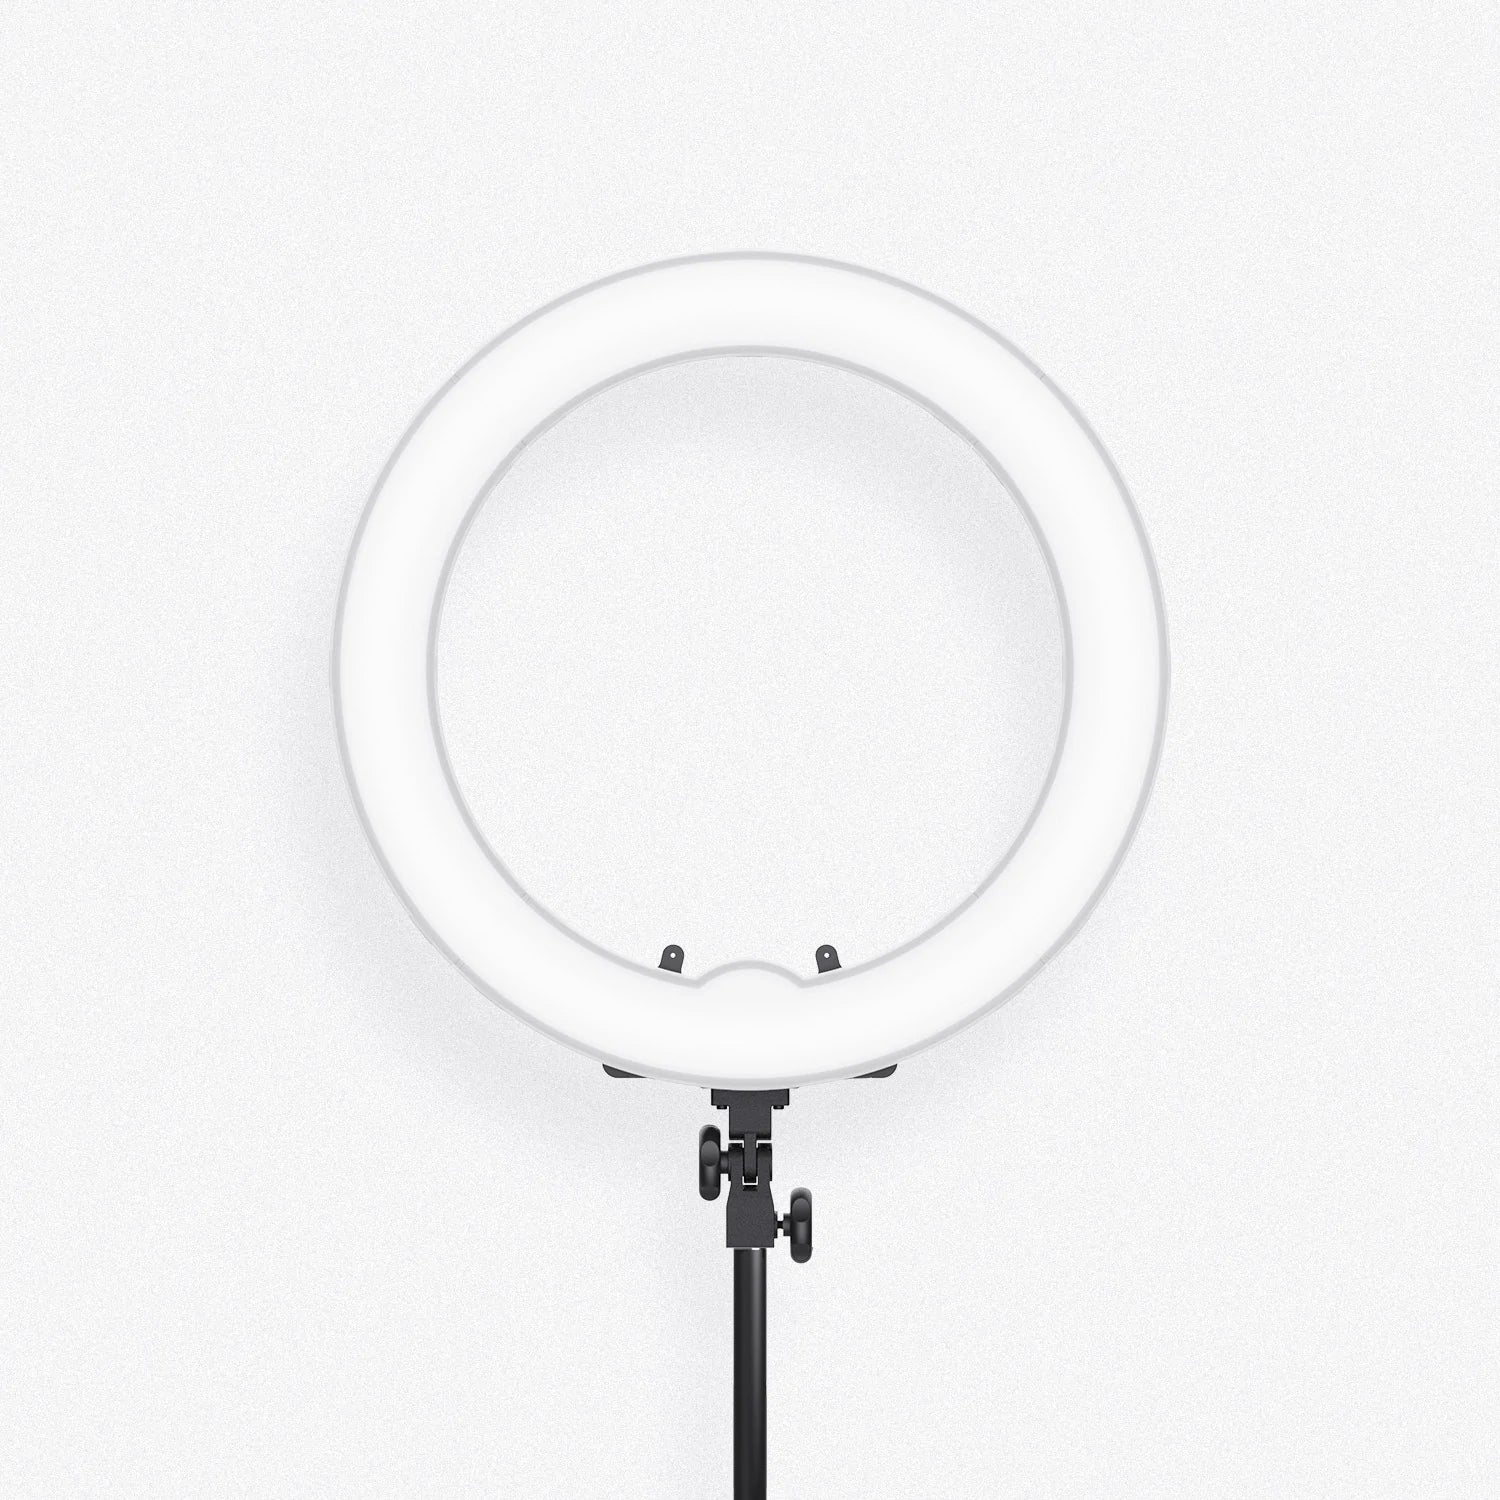 IVISII 19 Inch Ring Light R45C with LCD Screen